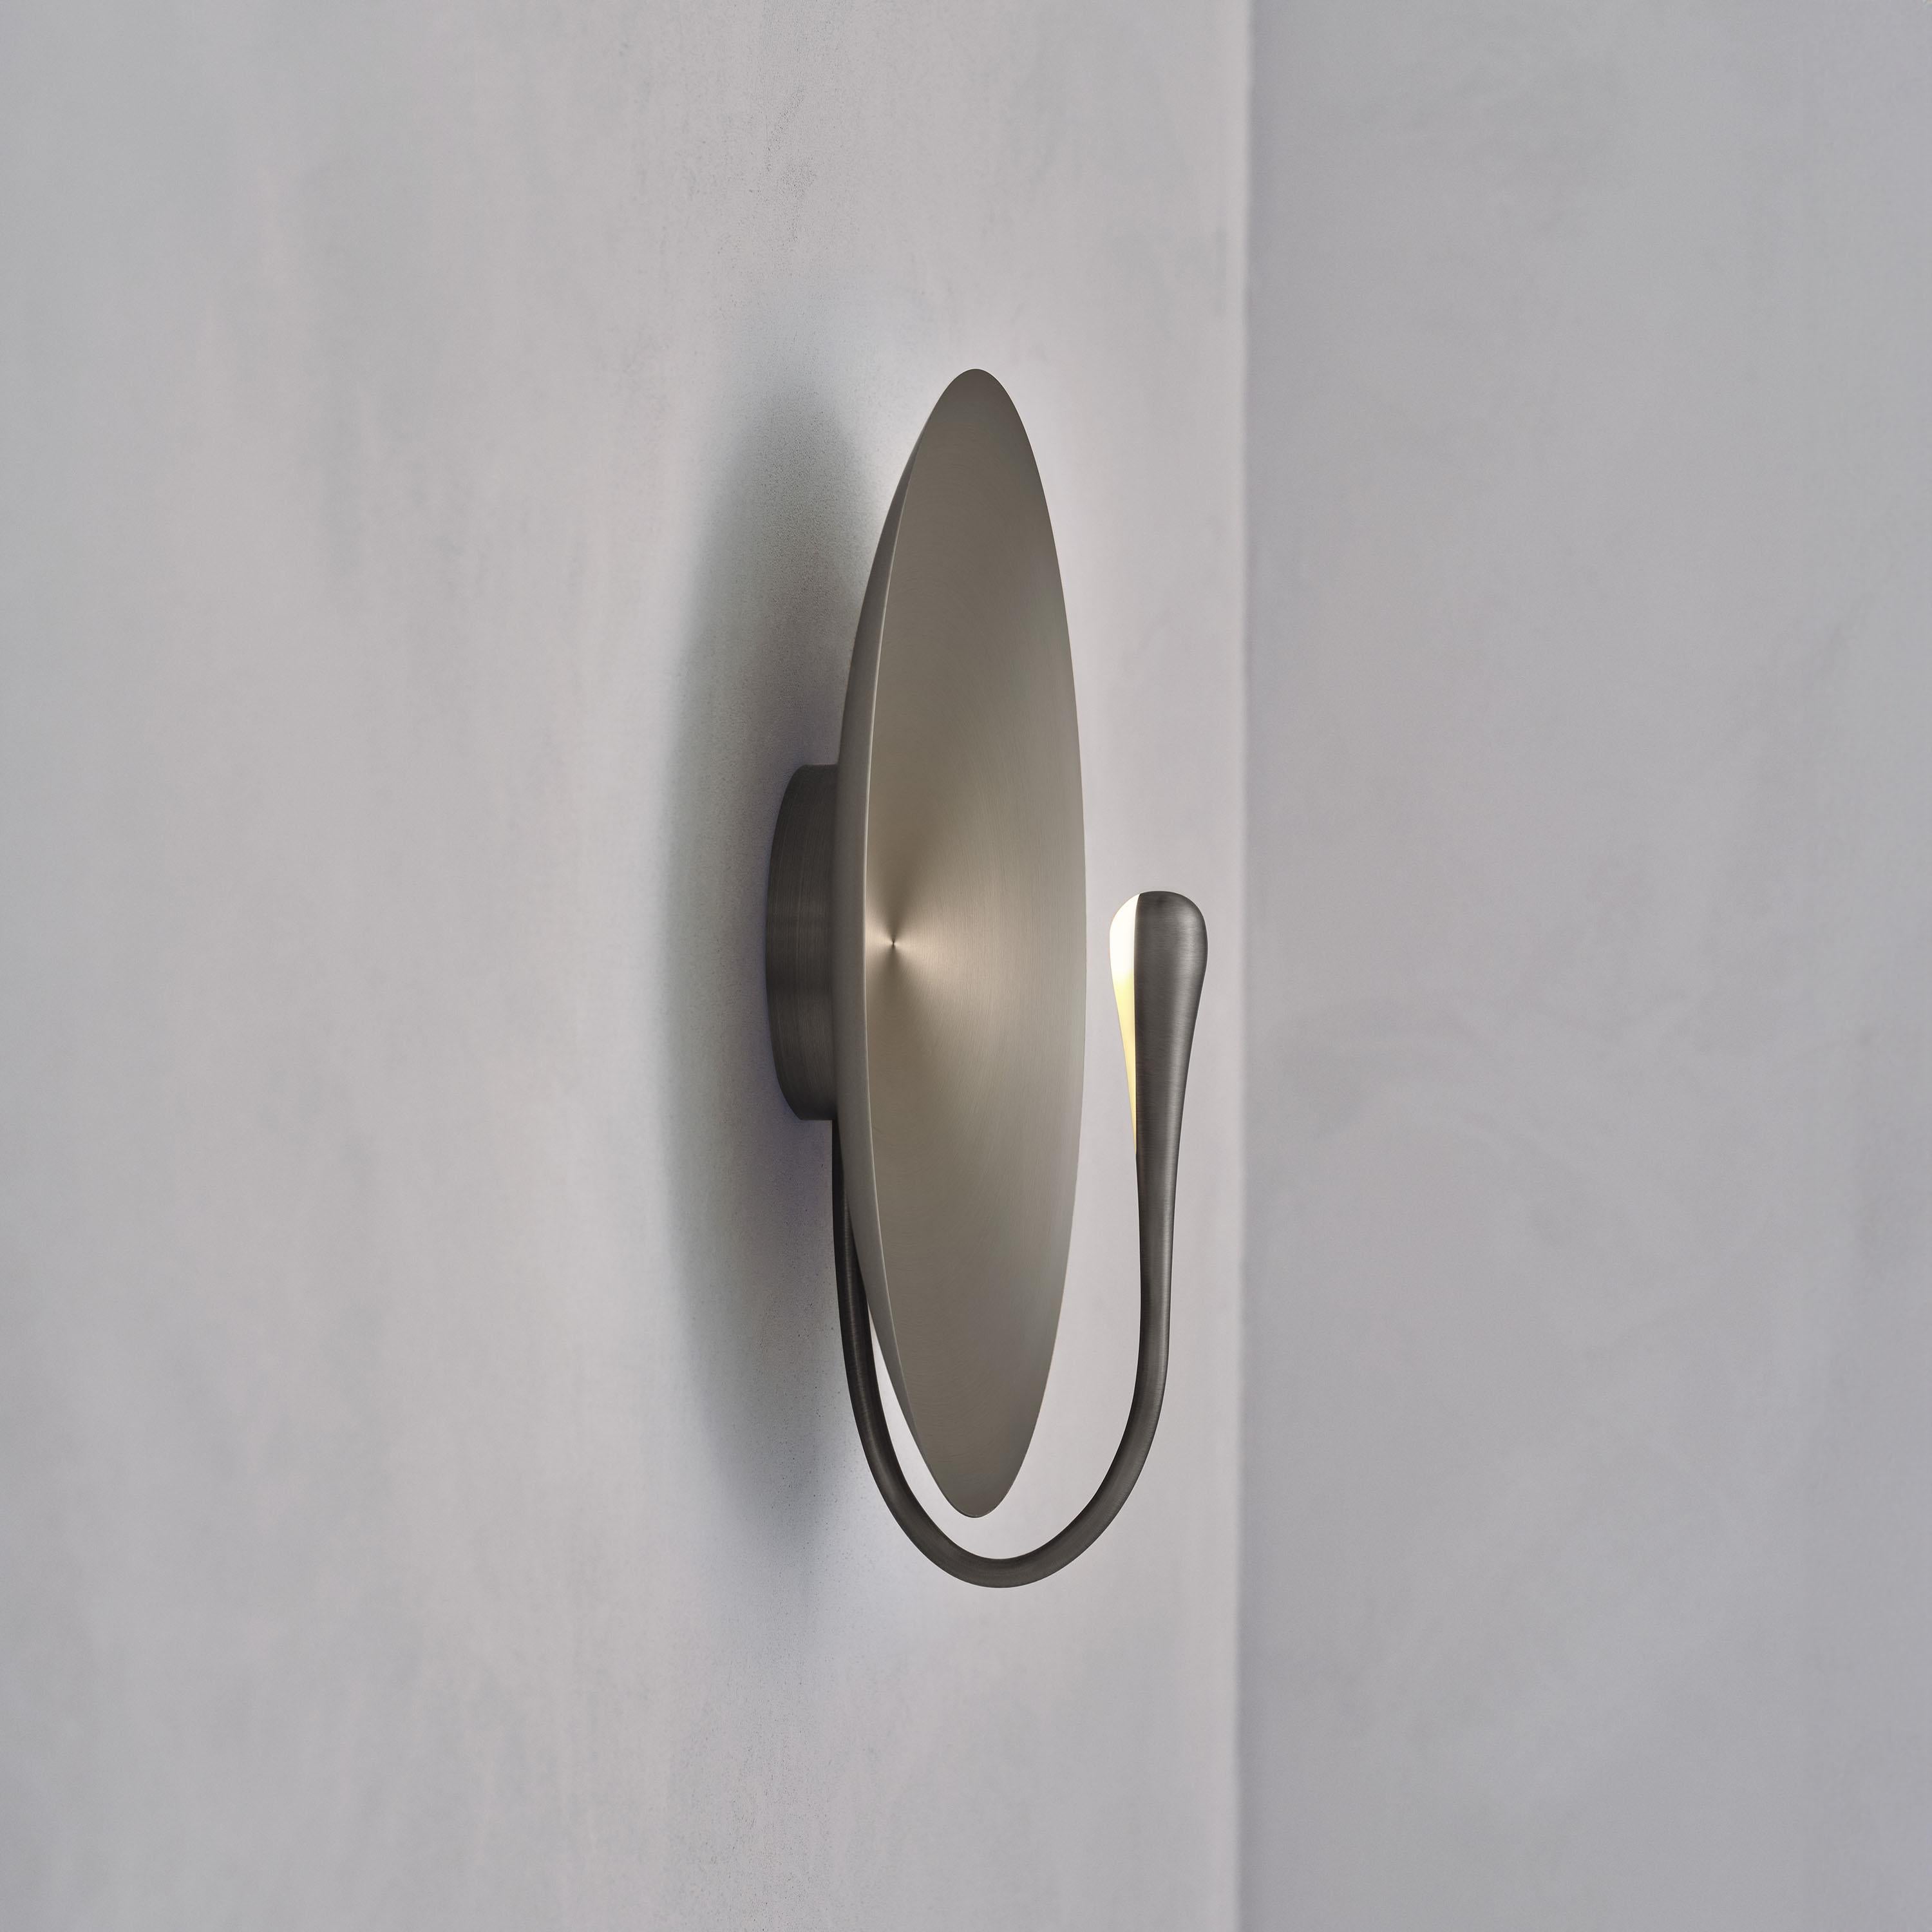 'Cosmic Seleno ' Handmade Brushed Steel Contemporary Wall Light Sconce In New Condition For Sale In London, GB